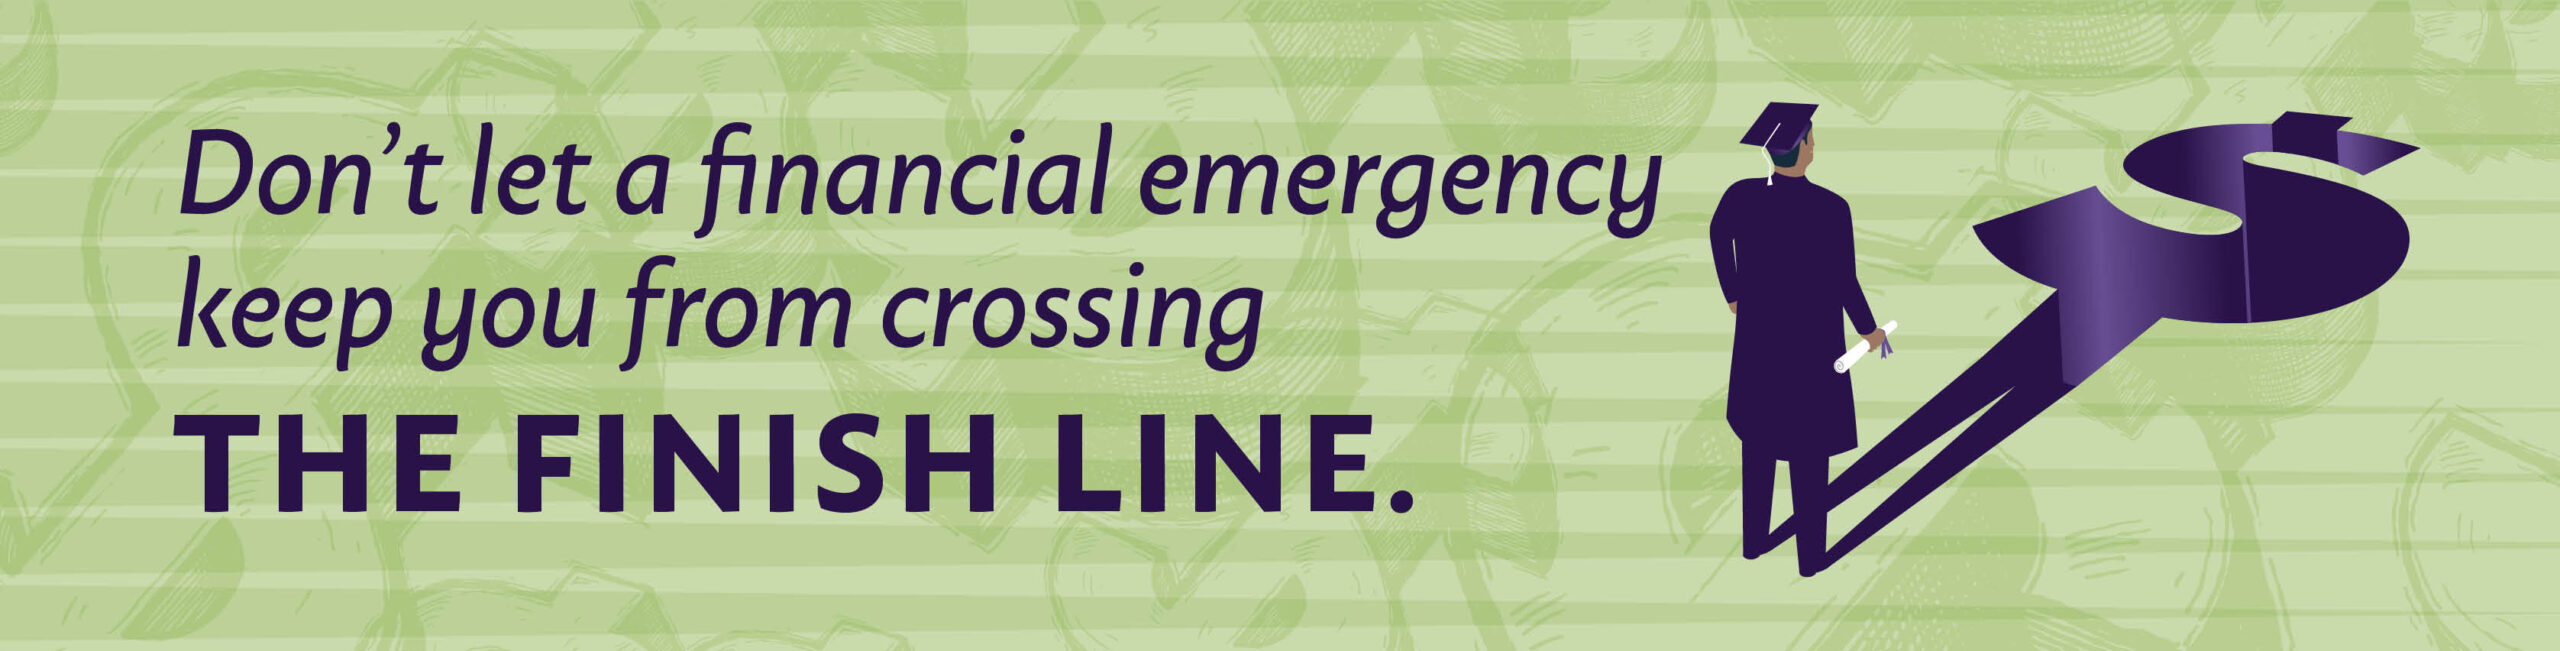 Don't let a financial emergency keep you from crossing the finish line. 